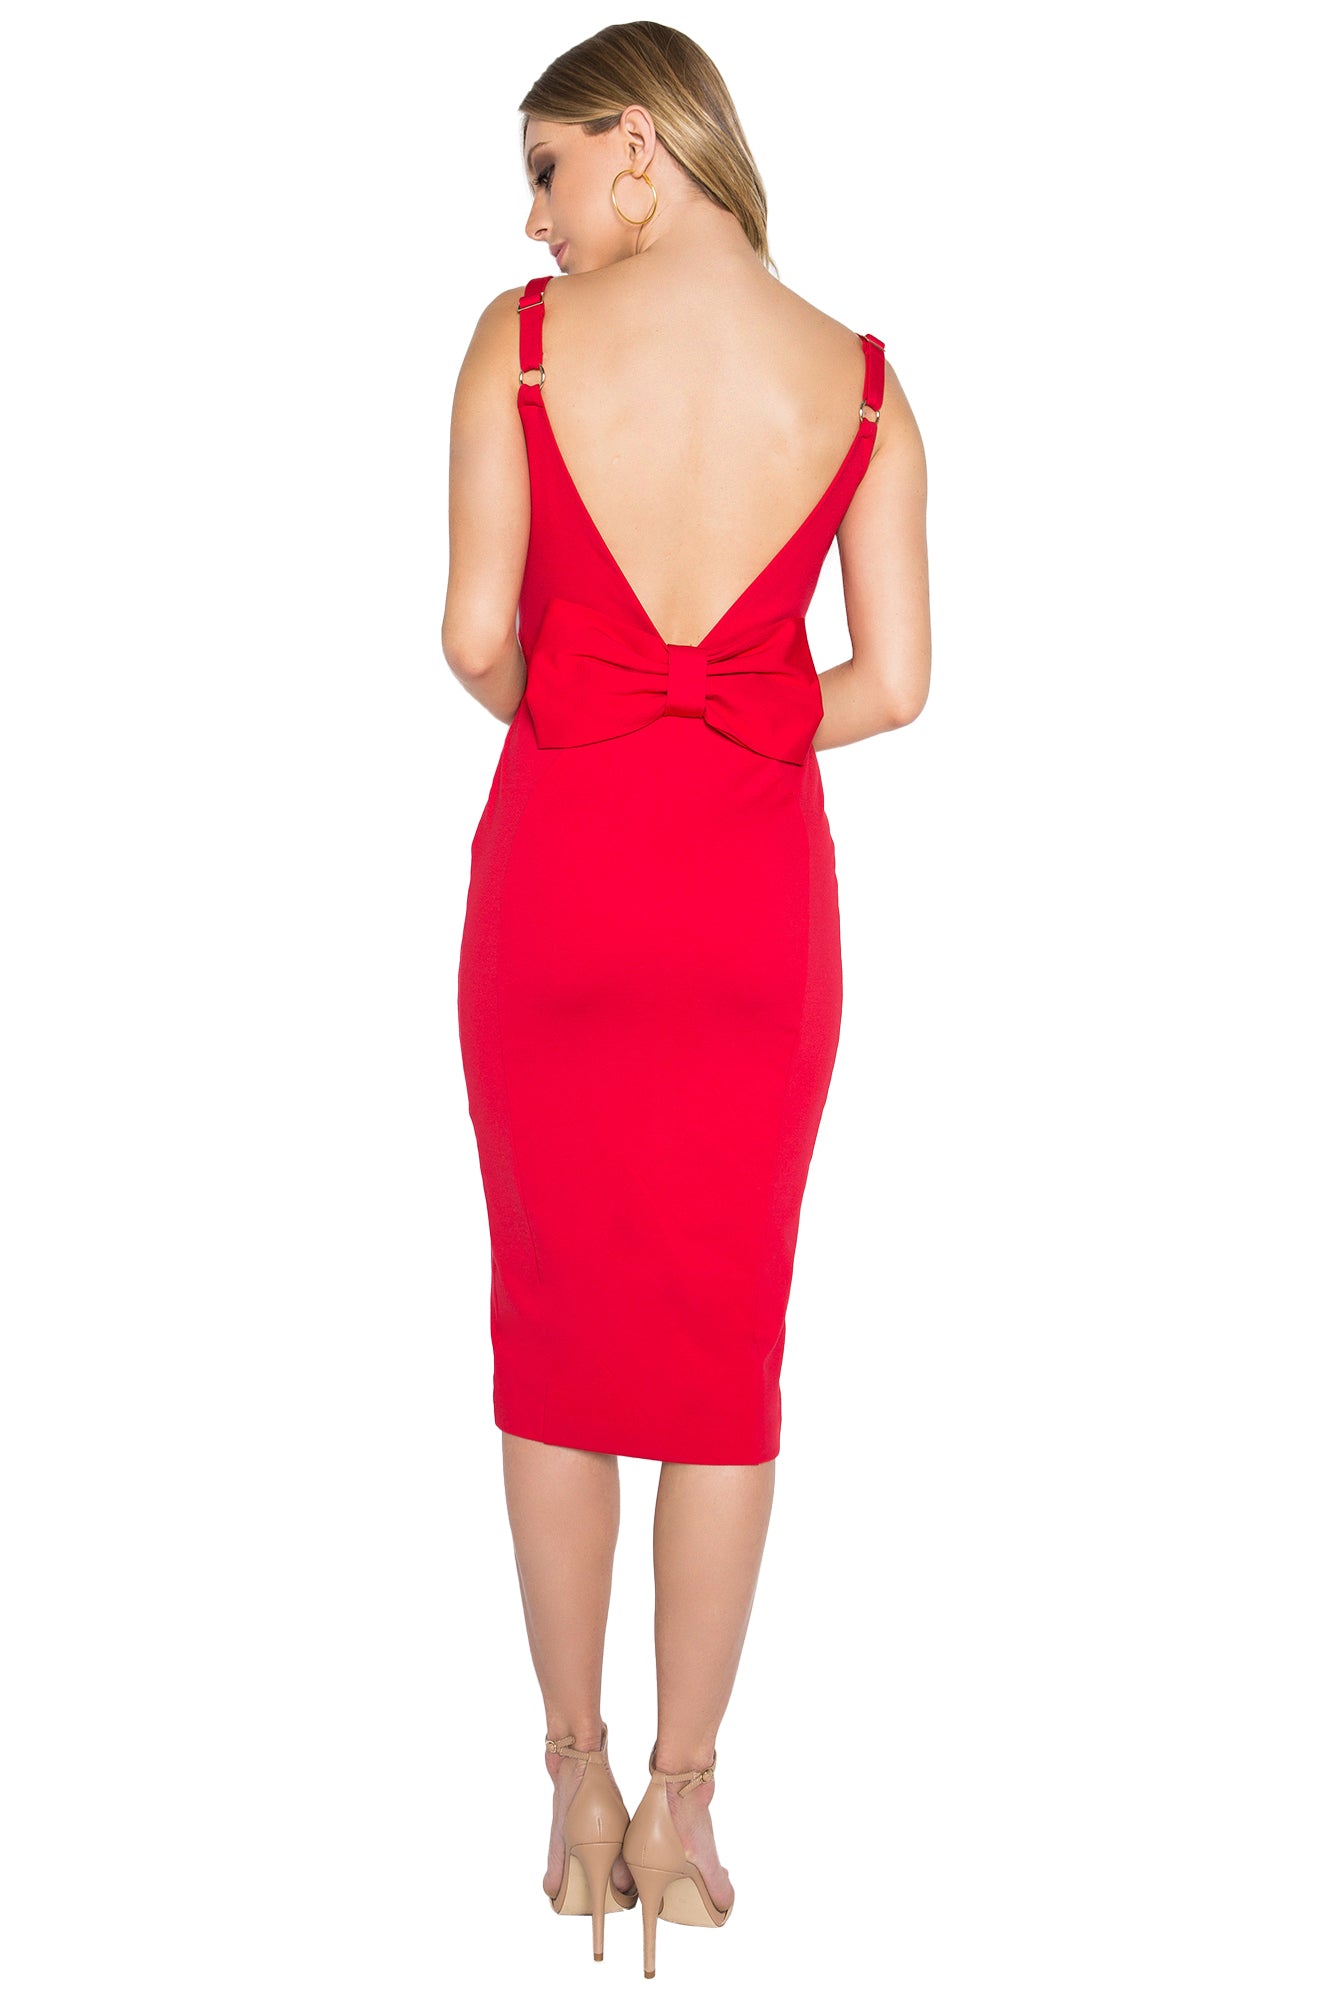 Back view of model wearing the Simona Maghen Homa Dress, red midi knit Ponte sleeveless dress with adjustable straps, sweetheart neckline, low back, and large bow at back waist.